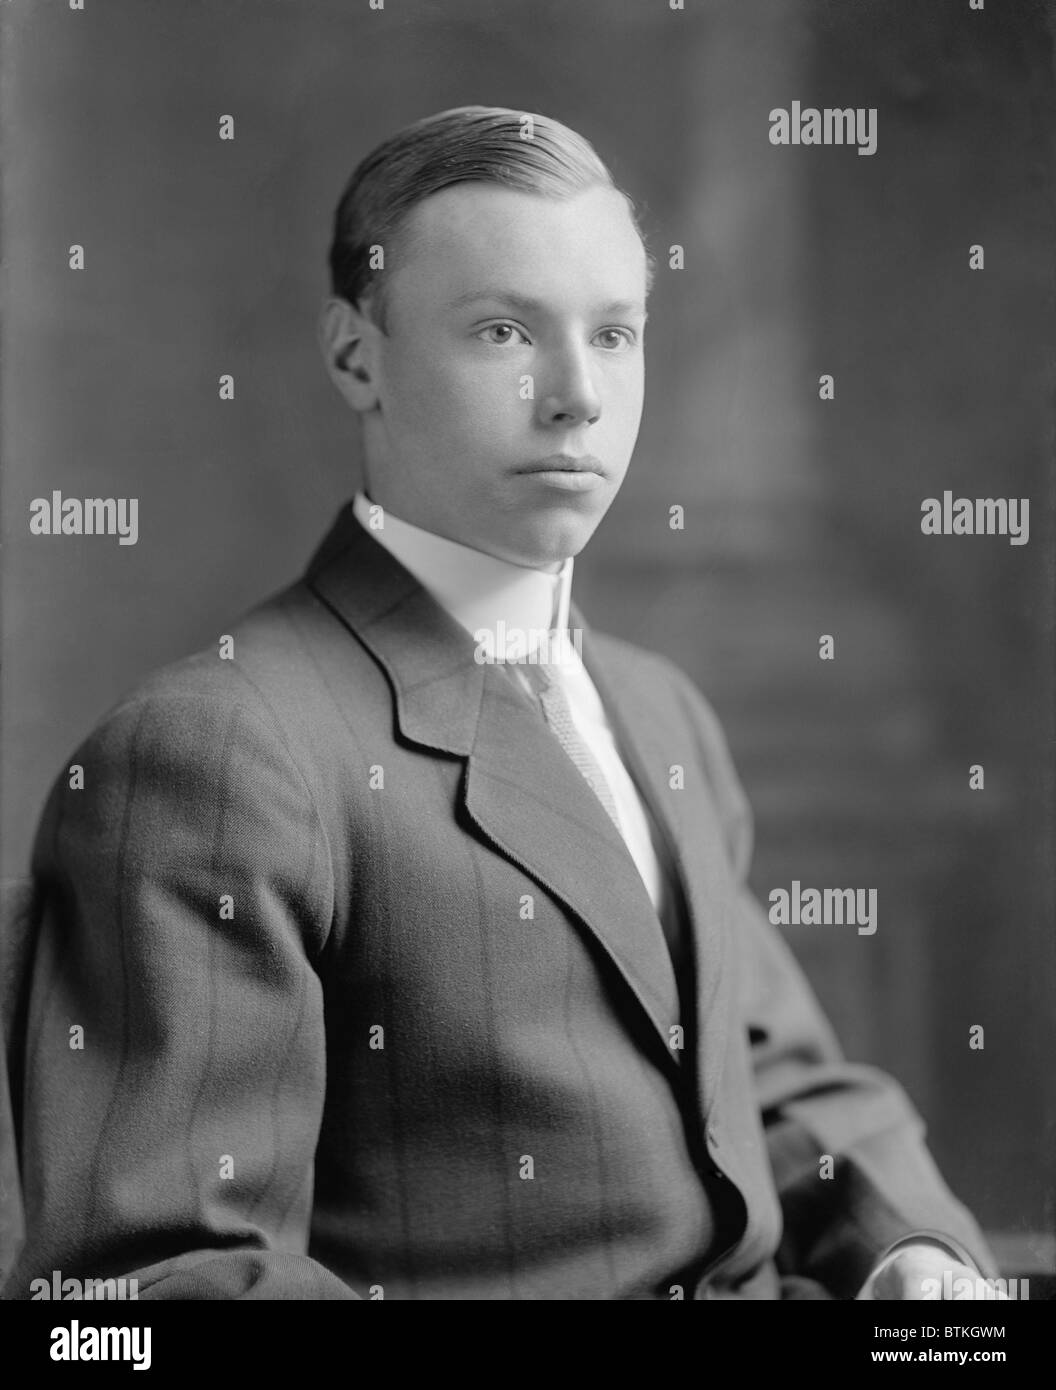 Robert Alphonse Taft (1889-1953), son of President William Howard Taft. He served as both Speaker of the House of Representatives and Senate majority leader, and ran for unsuccessfully for the Republican presidential nomination three times. Ca. 1915 Stock Photo